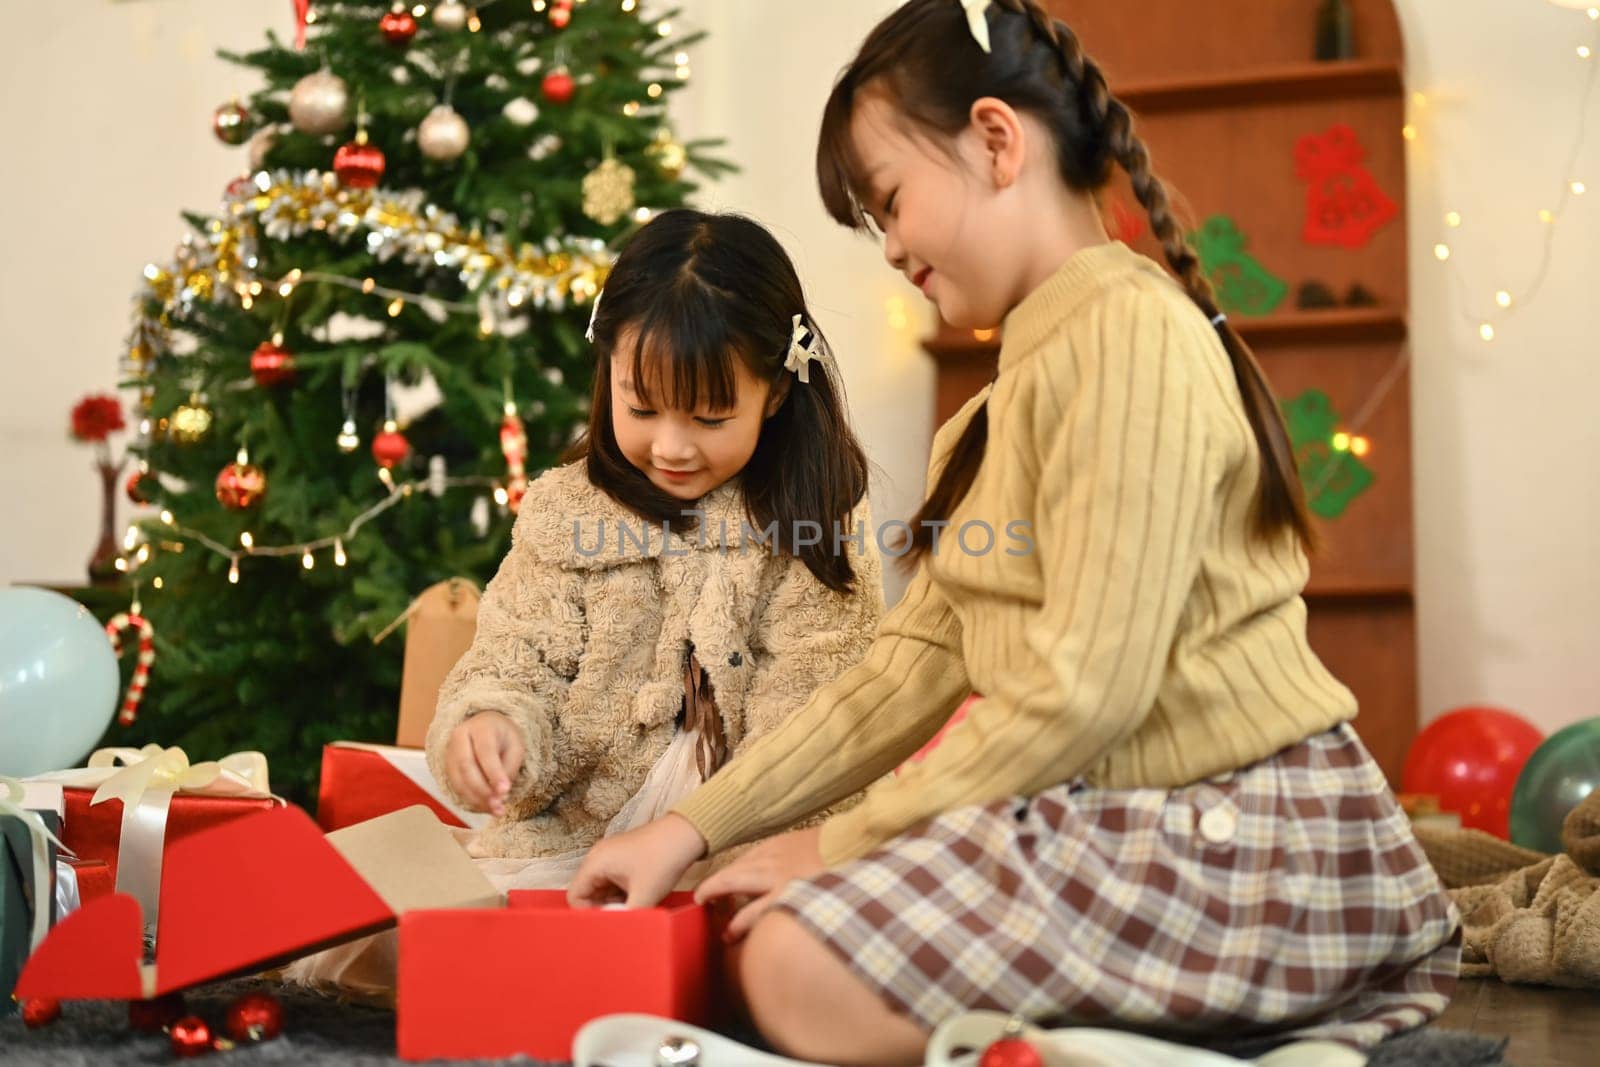 Charming siblings sitting on floor in decorated living room opening Christmas gift. Holidays and childhood concept.